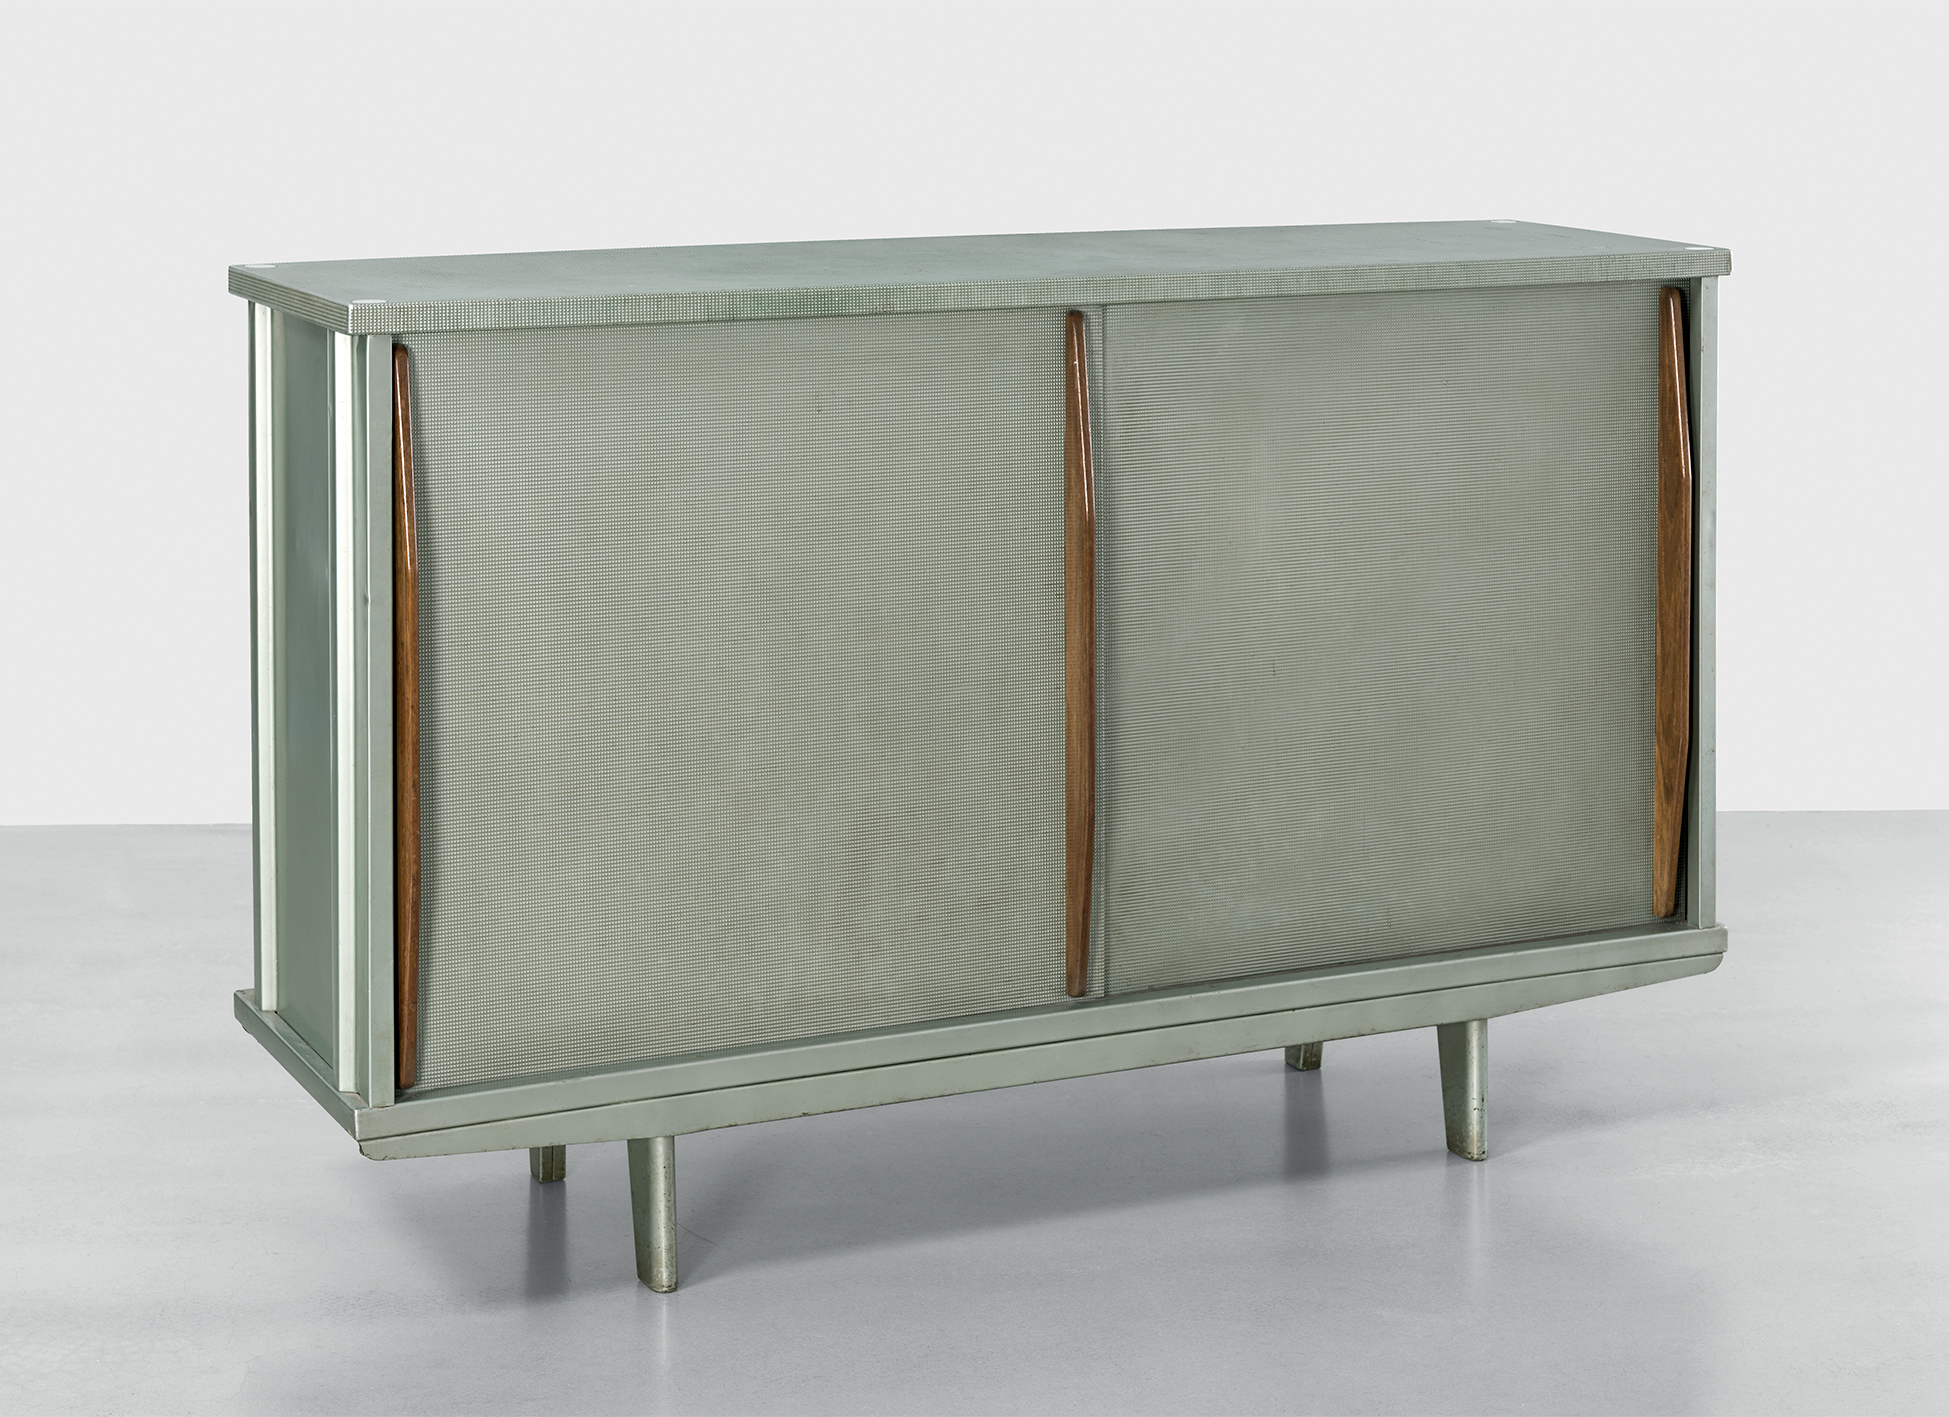 Cabinet no. 152, variant with lacquered pressed aluminum sides, doors and top covered with diamond-patterned sheet aluminum, 1952.